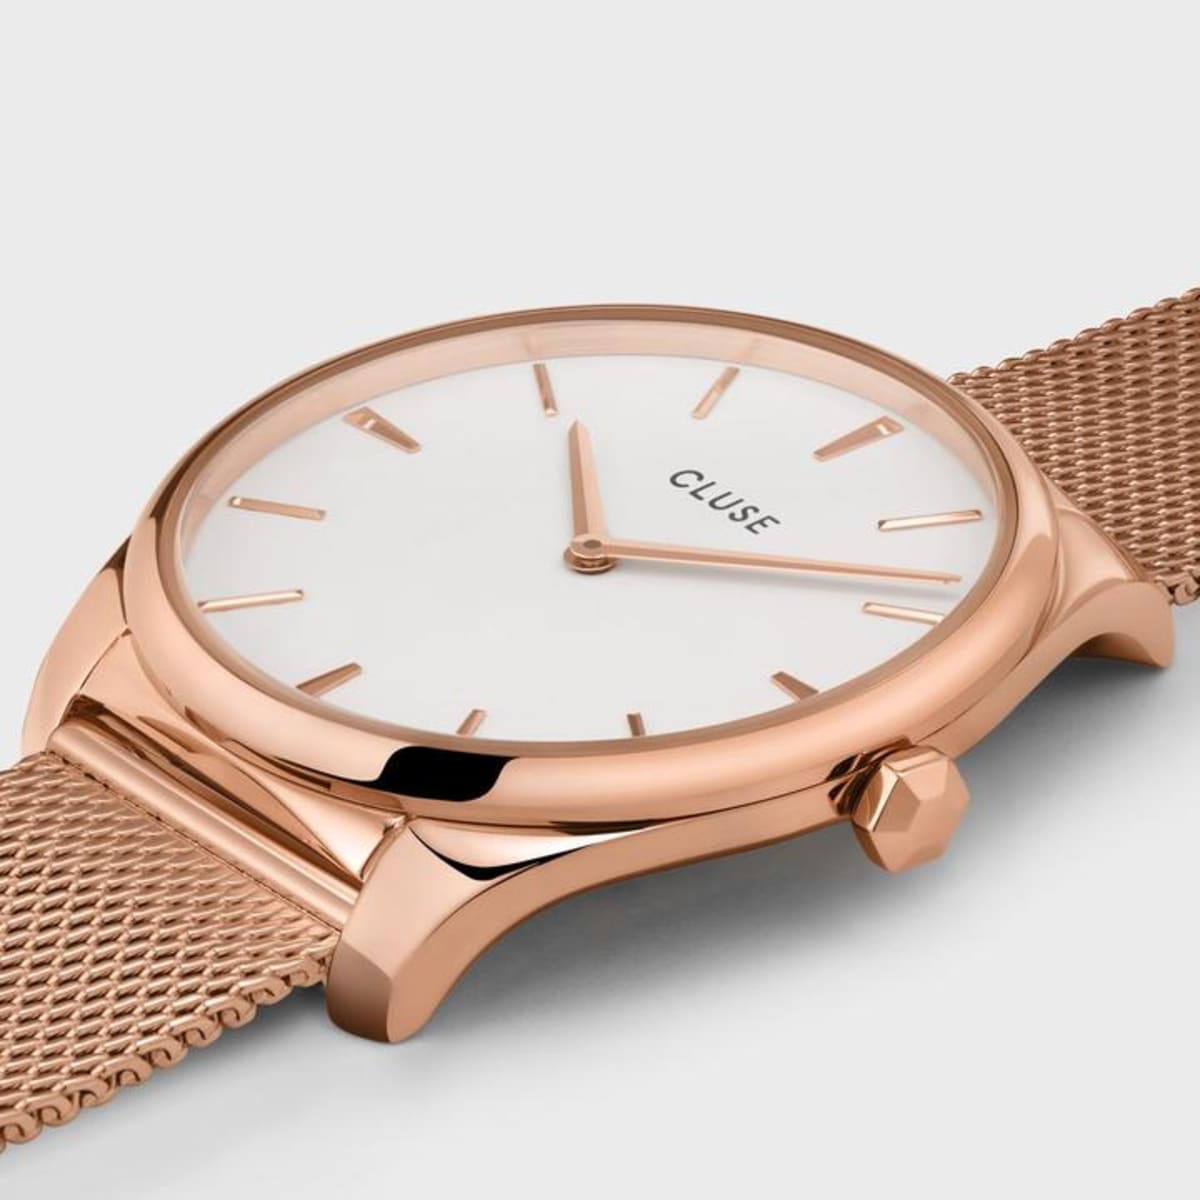 CLUSE Féroce Mesh Rose Gold/White - John Ross Jewellers